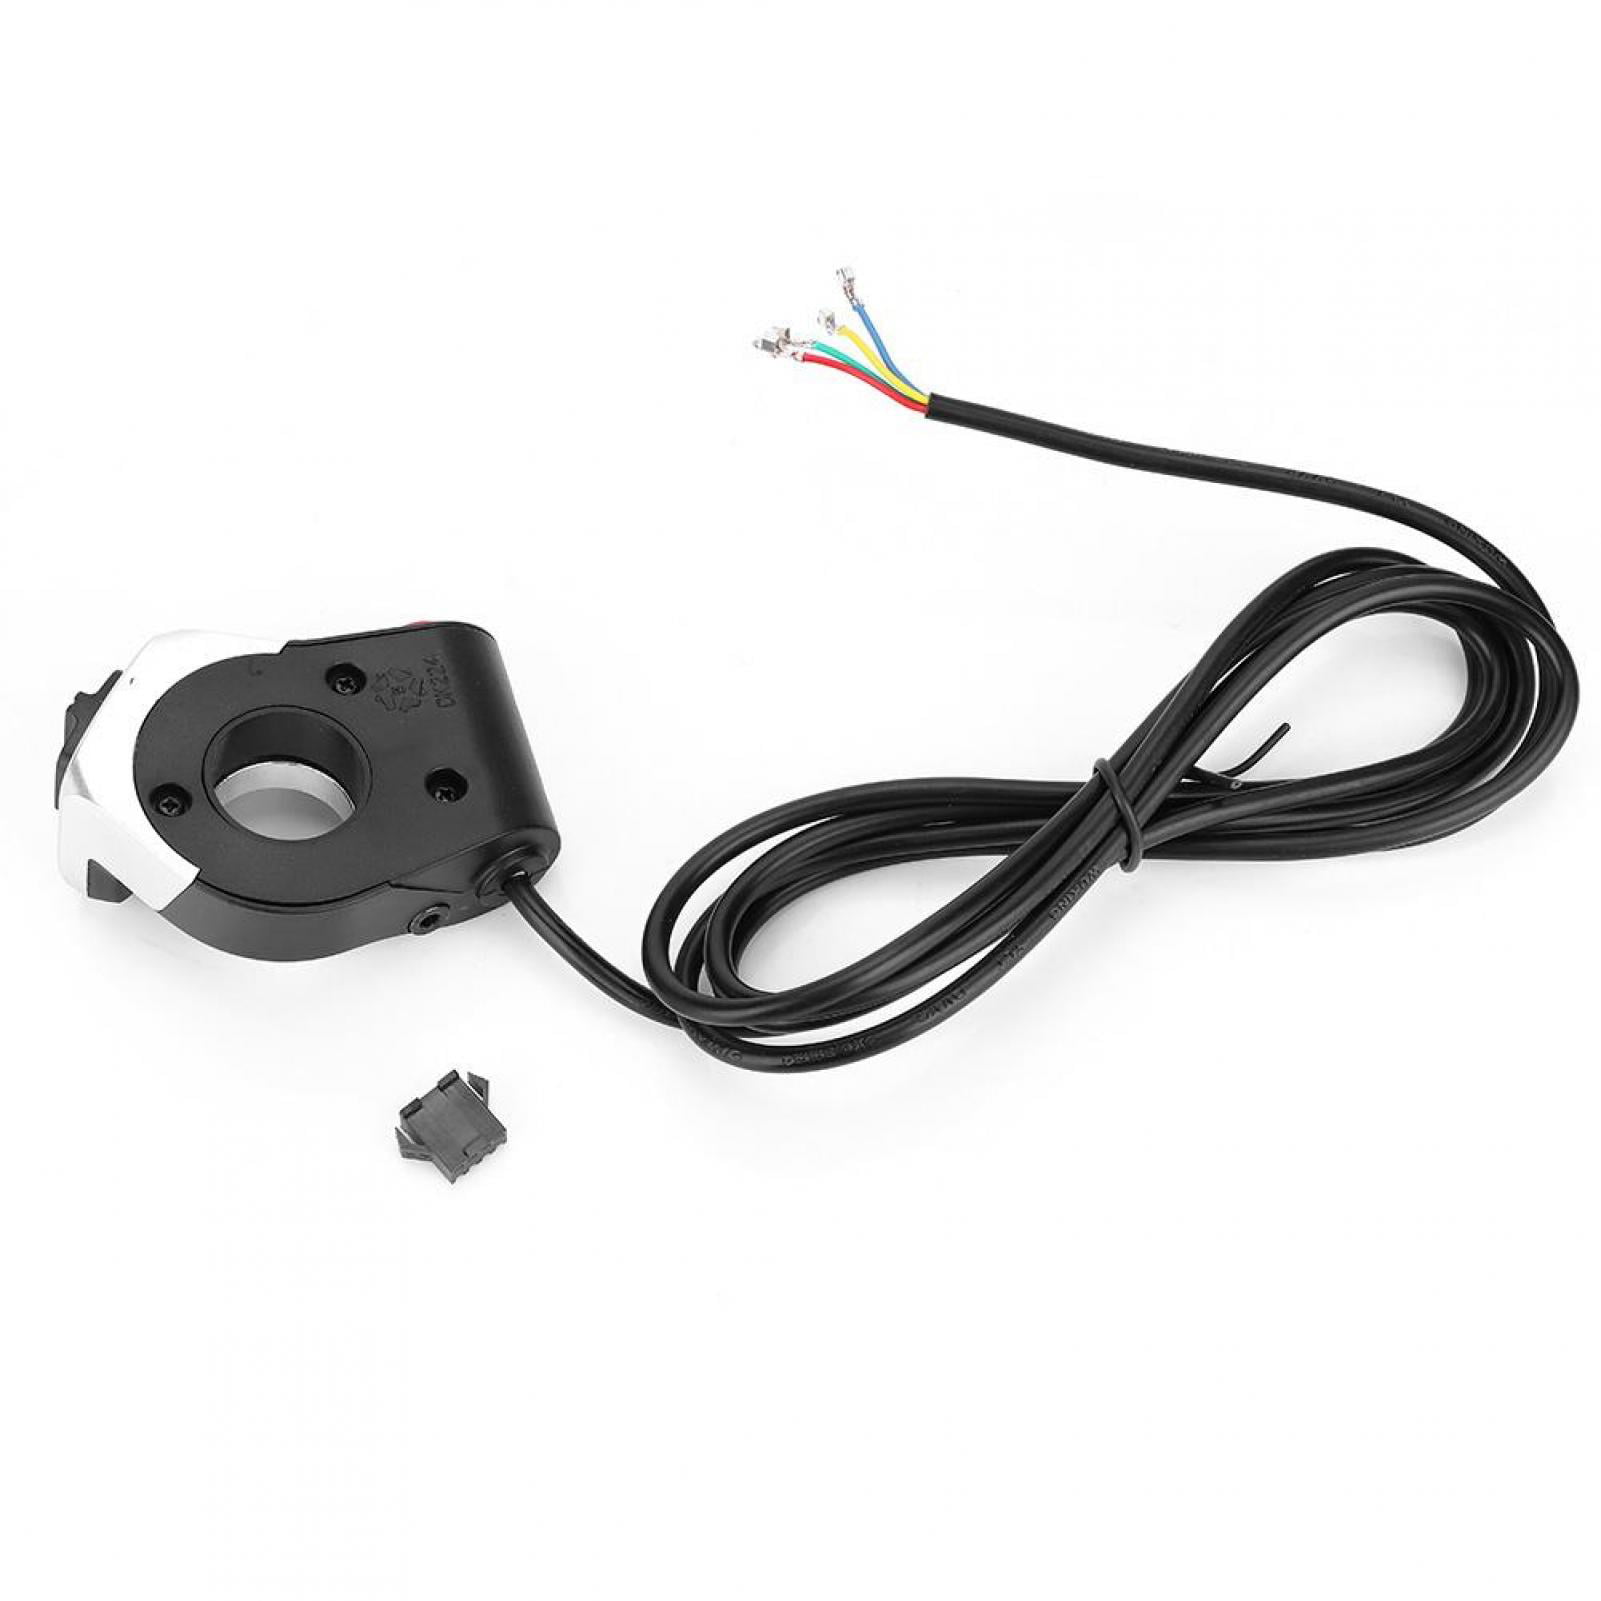 Horn&Headlight Switch Wiring Button Fr 22.5mm Handlebar Motorcycle Scooter Ebike 